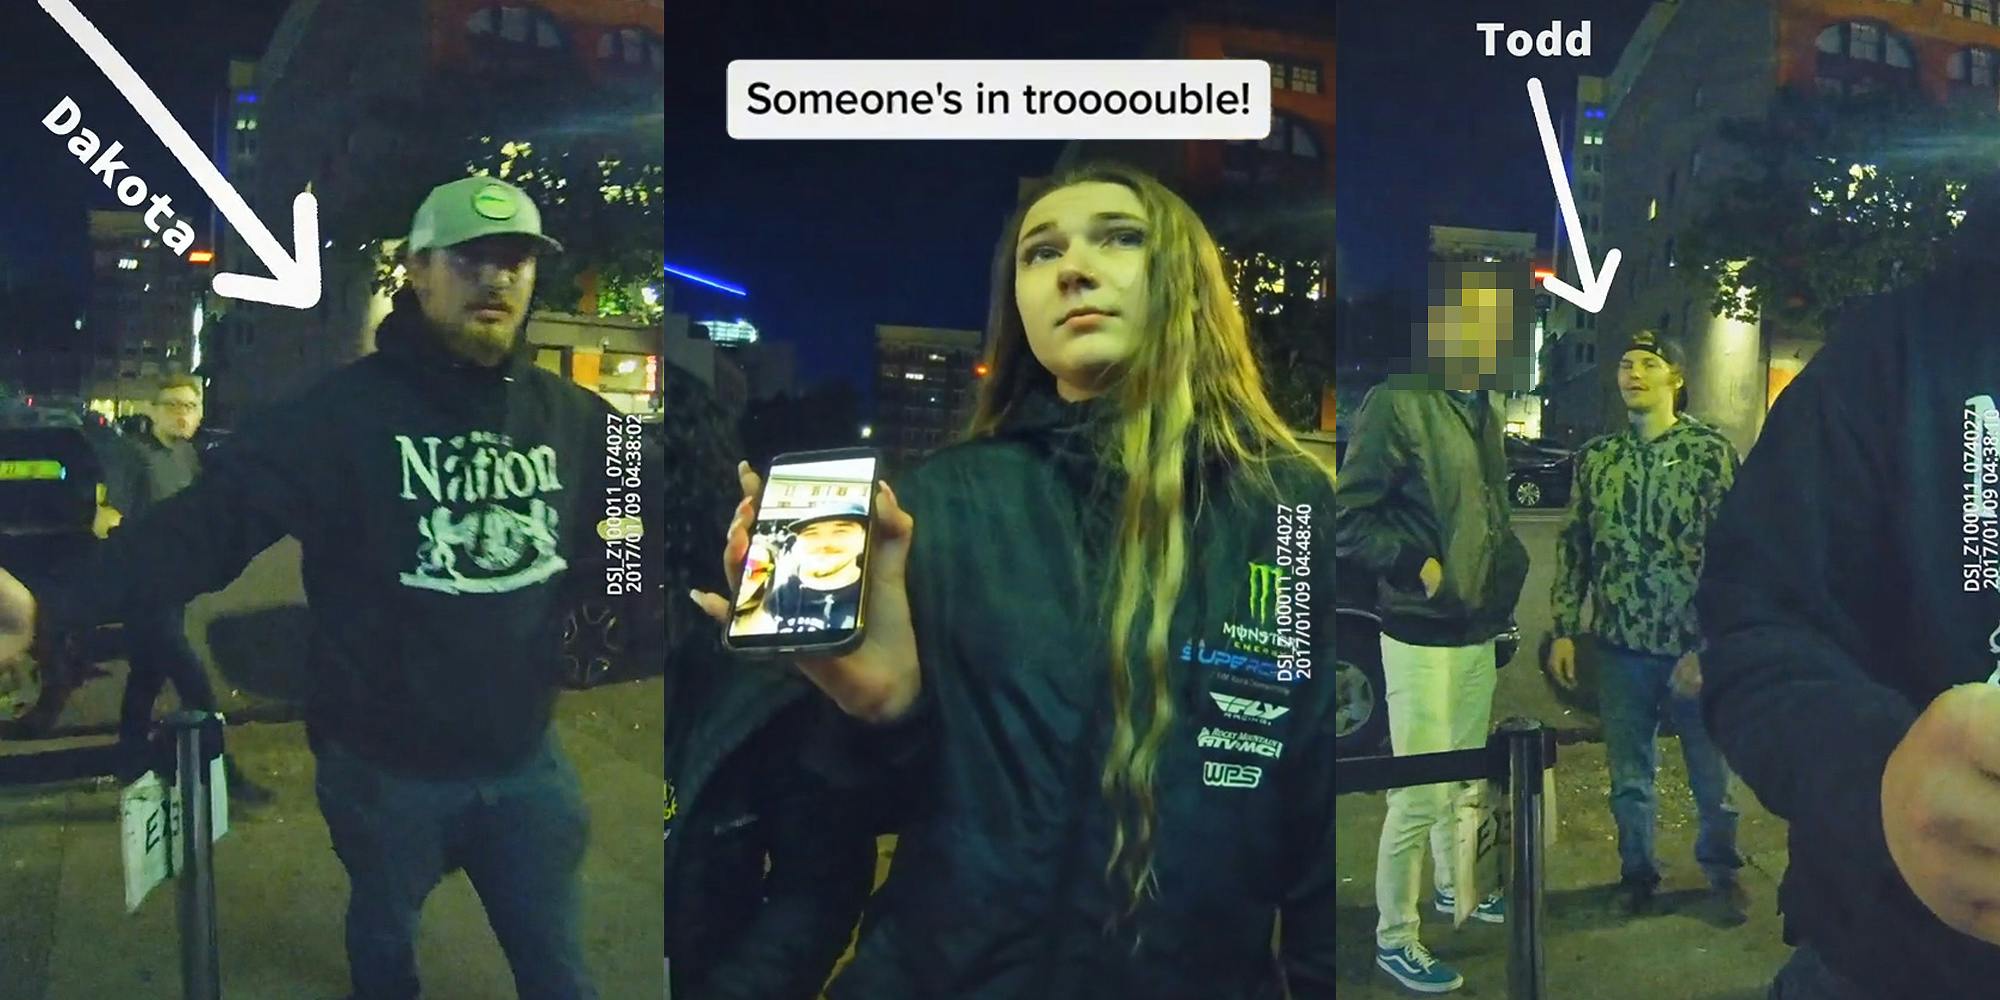 man walking up to bouncer of strip club arrow pointing to him "Dakota" (l) woman holding phone with photo of Dakota on screen up to bouncer caption "Someone's in troooouble!" (c) other man near bouncer of strip club arrow pointing to him "Todd" (r)